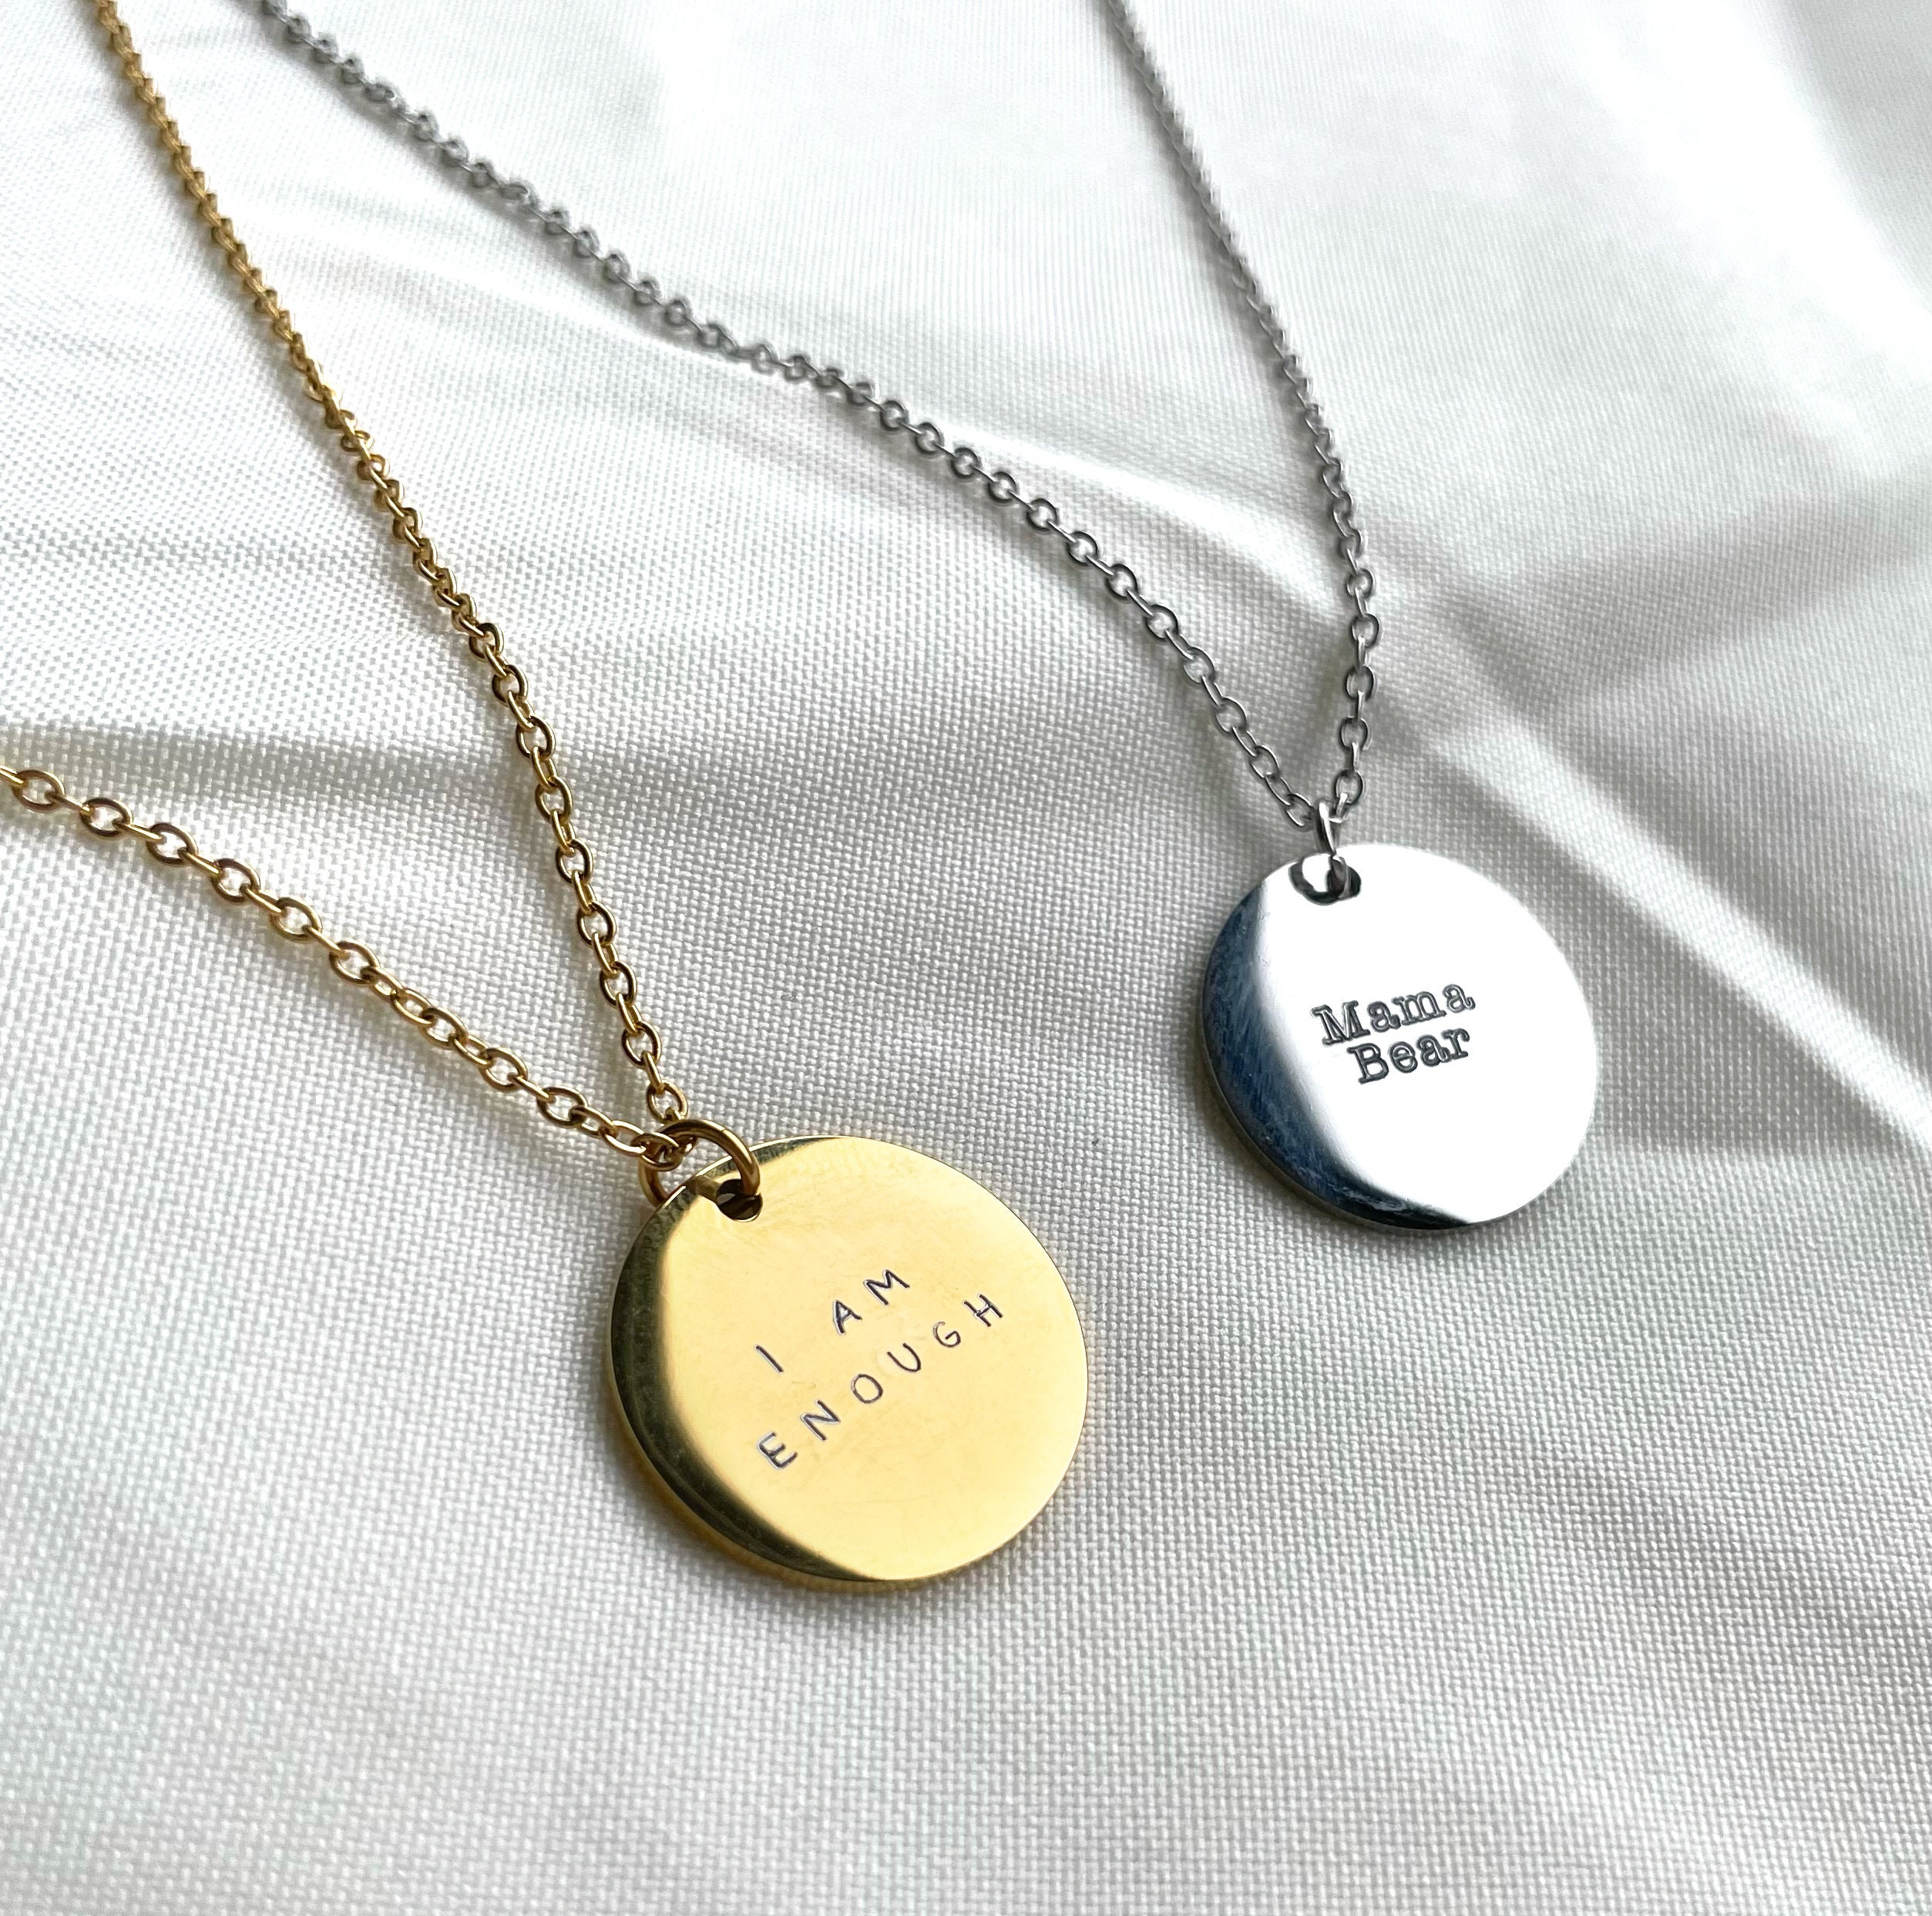 Motivational Necklace | I AM ENOUGH NZ – The Mum Tribe